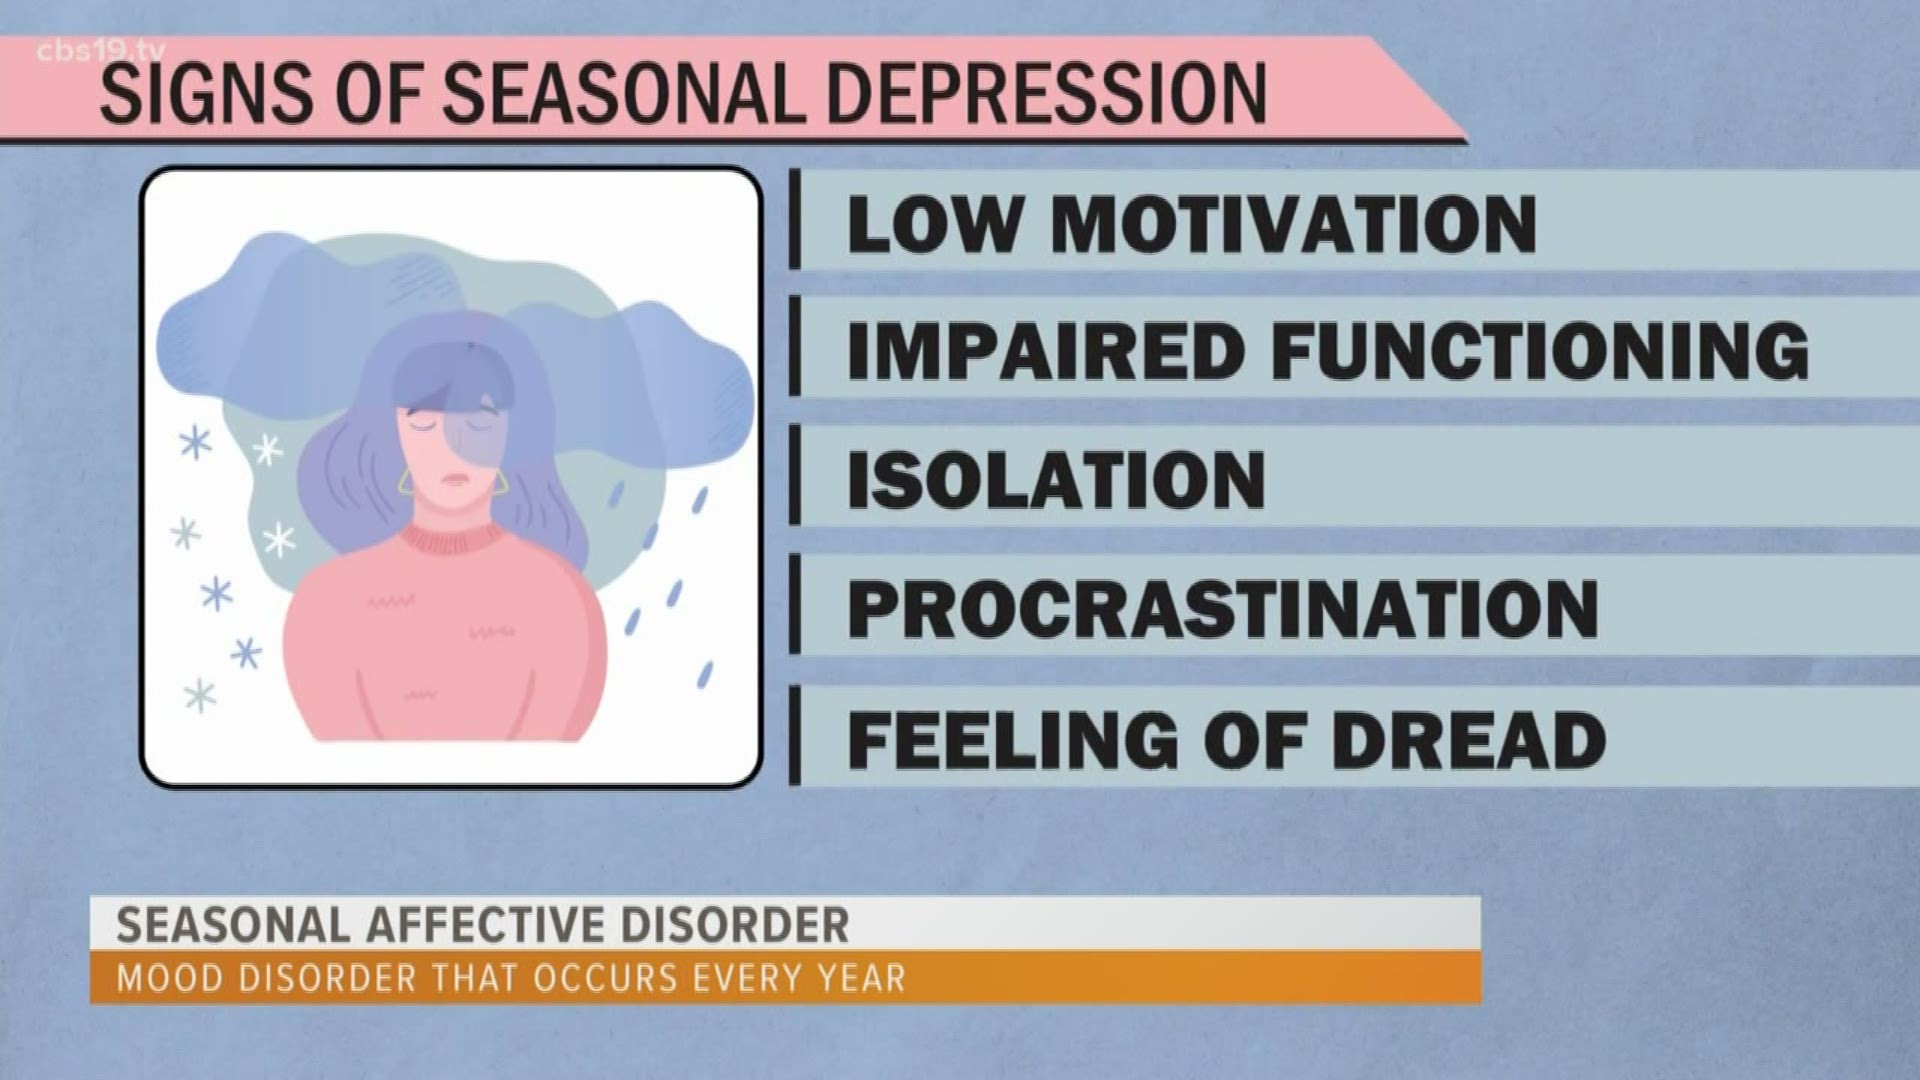 Seasonal Affective Disorder is a major depressive disorder that affects more than 14.5 million Americans every year.